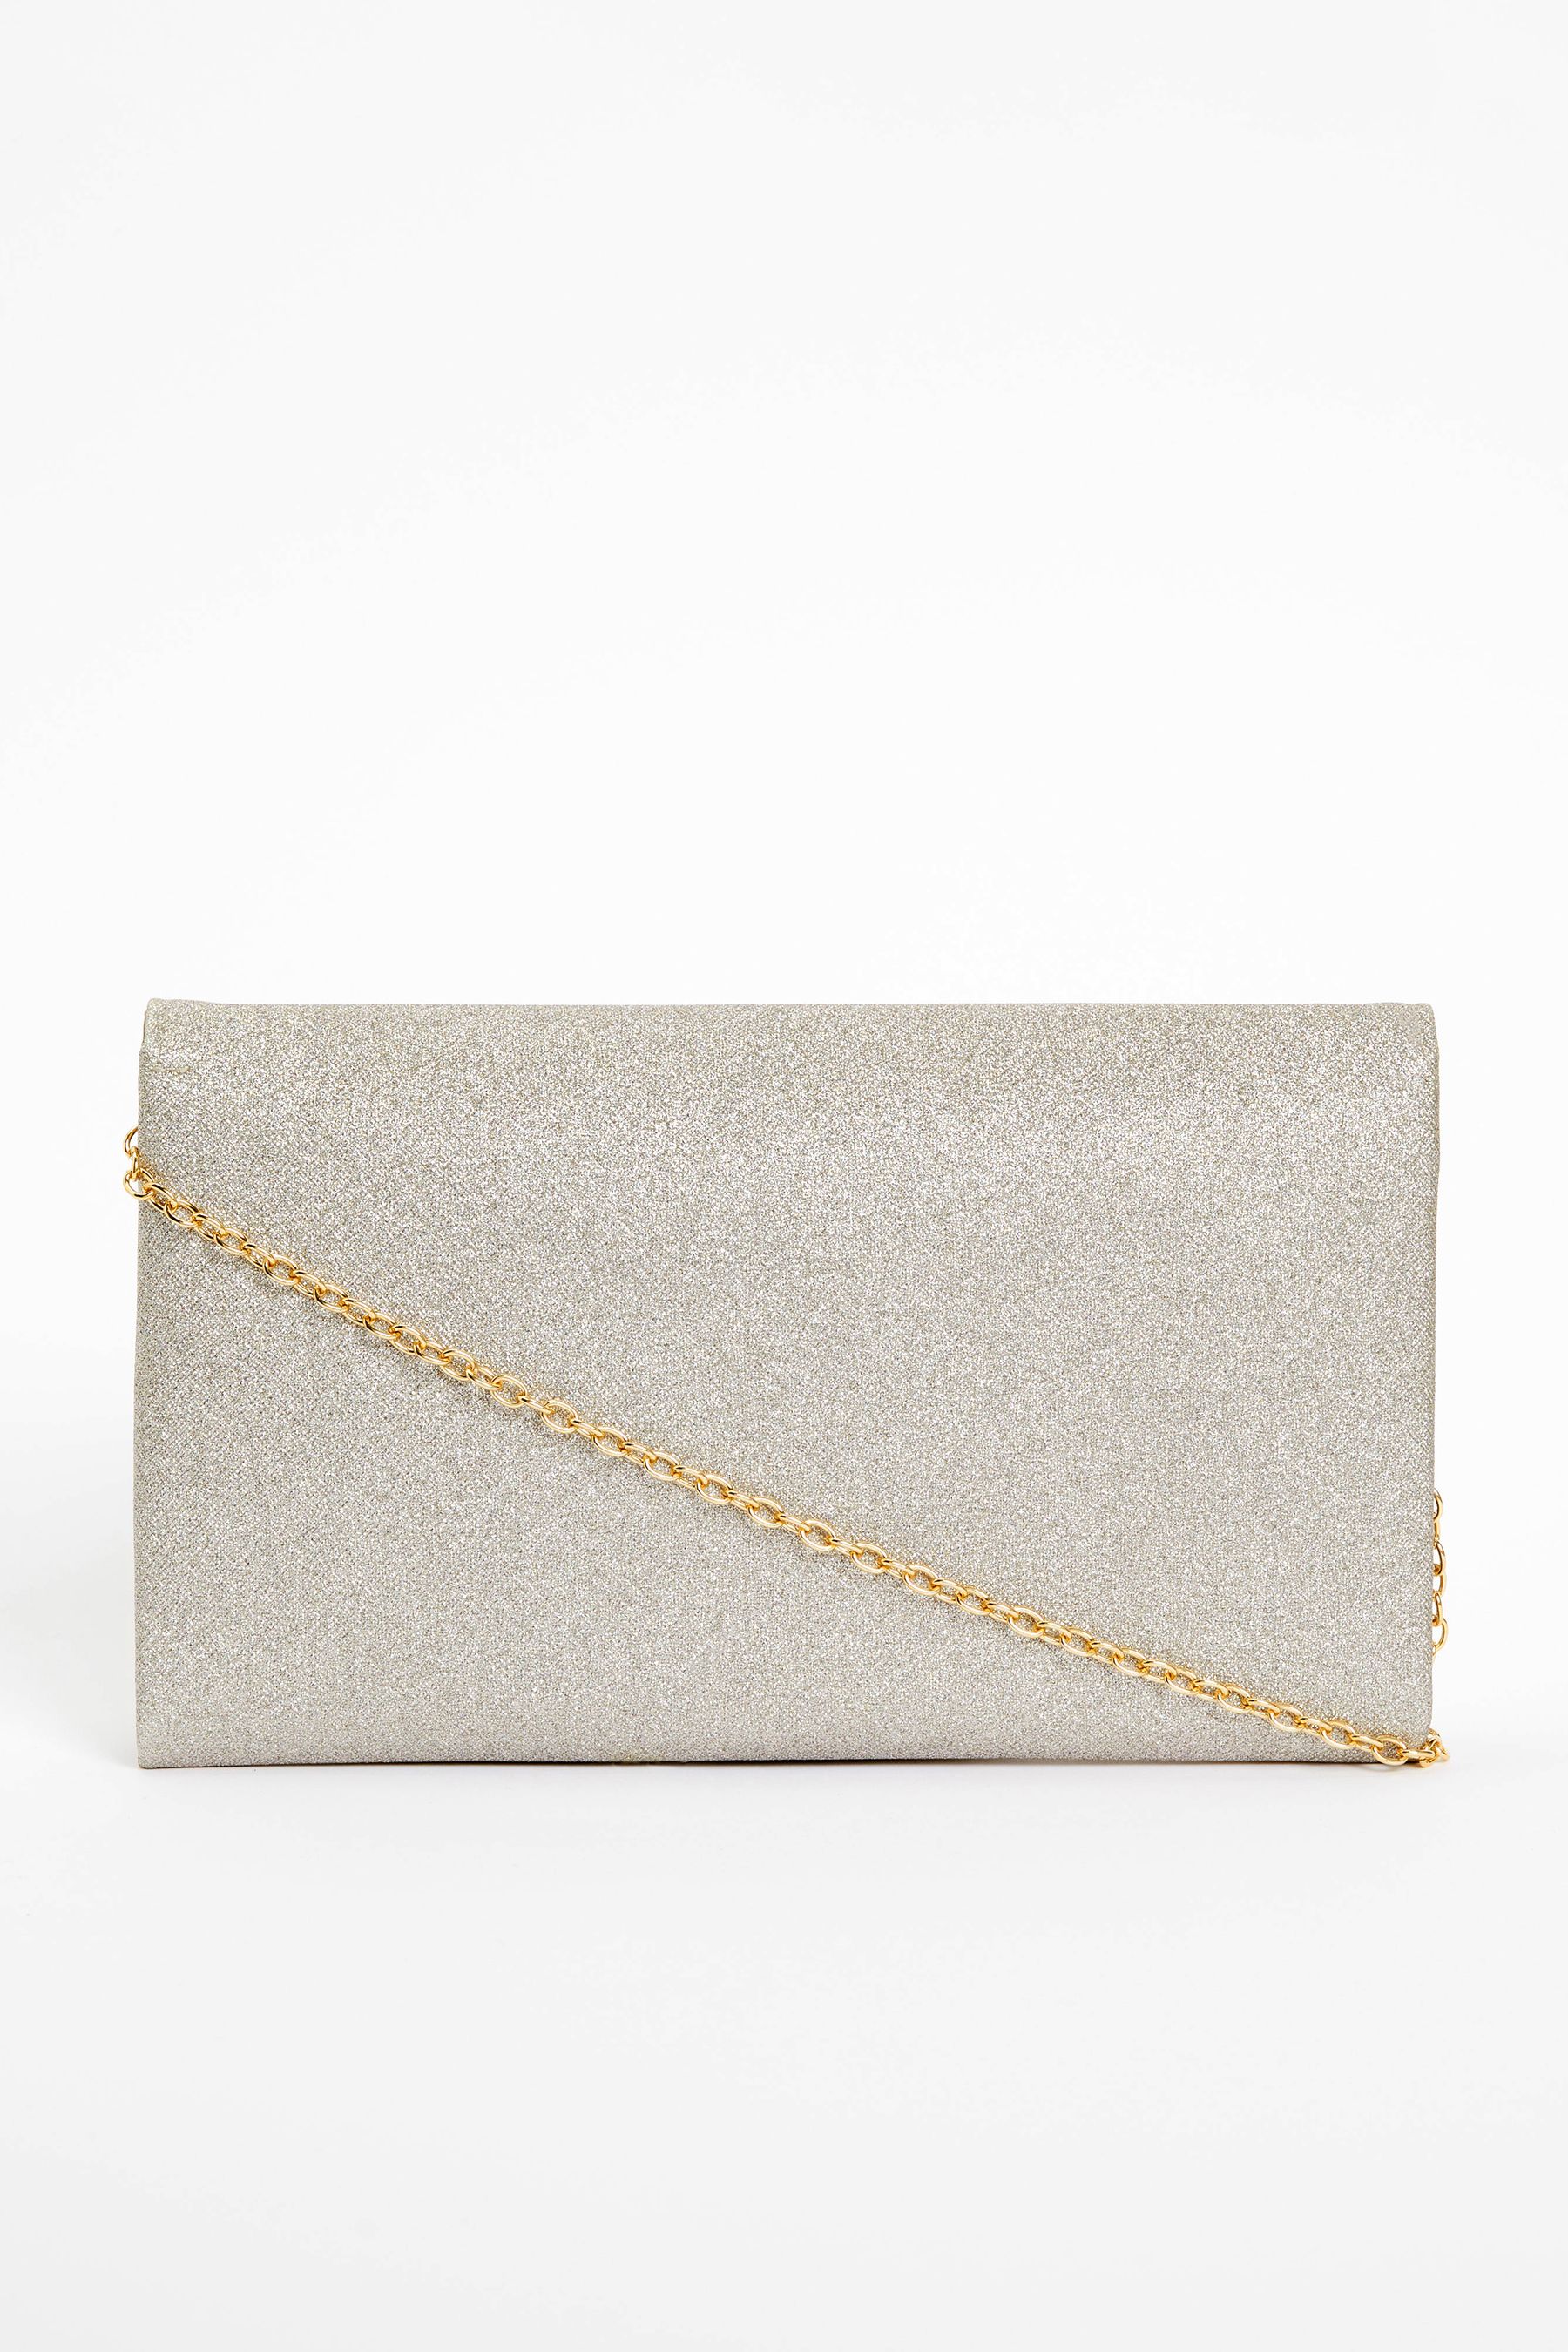 Buy Shimmer Clutch Bag With Detachable Cross-Body Chain from Next Ireland